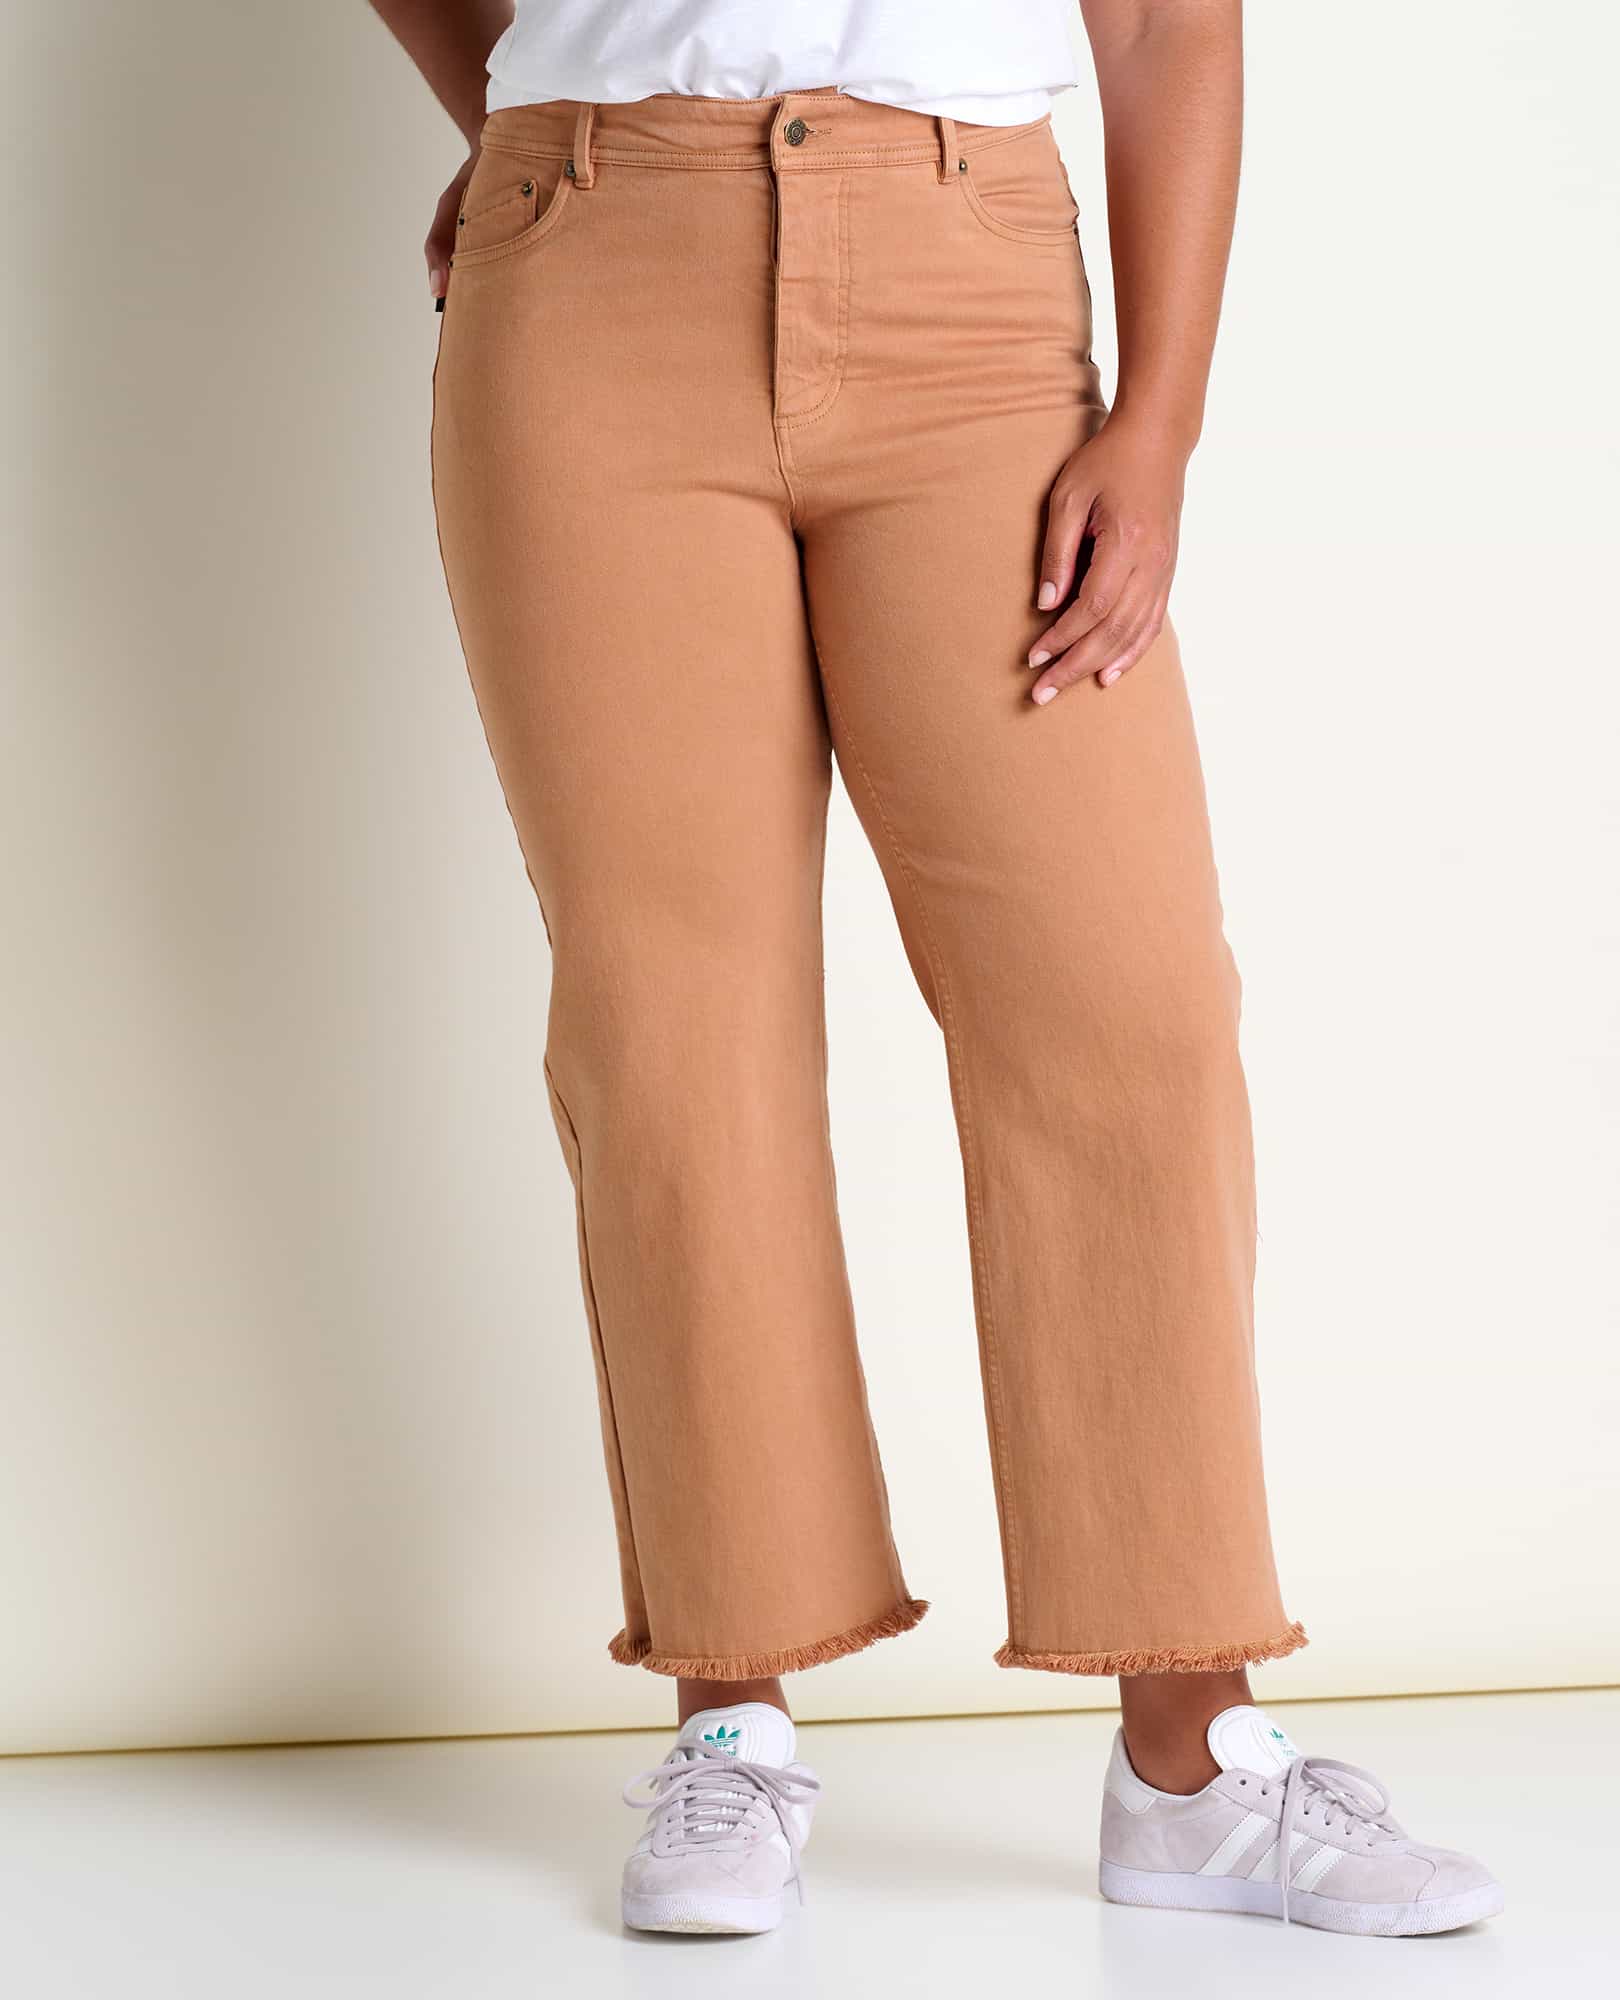 Intro The Audrey Stretch Woven Gingham Print Pull-On Kick Flare Leg Ankle  Pants